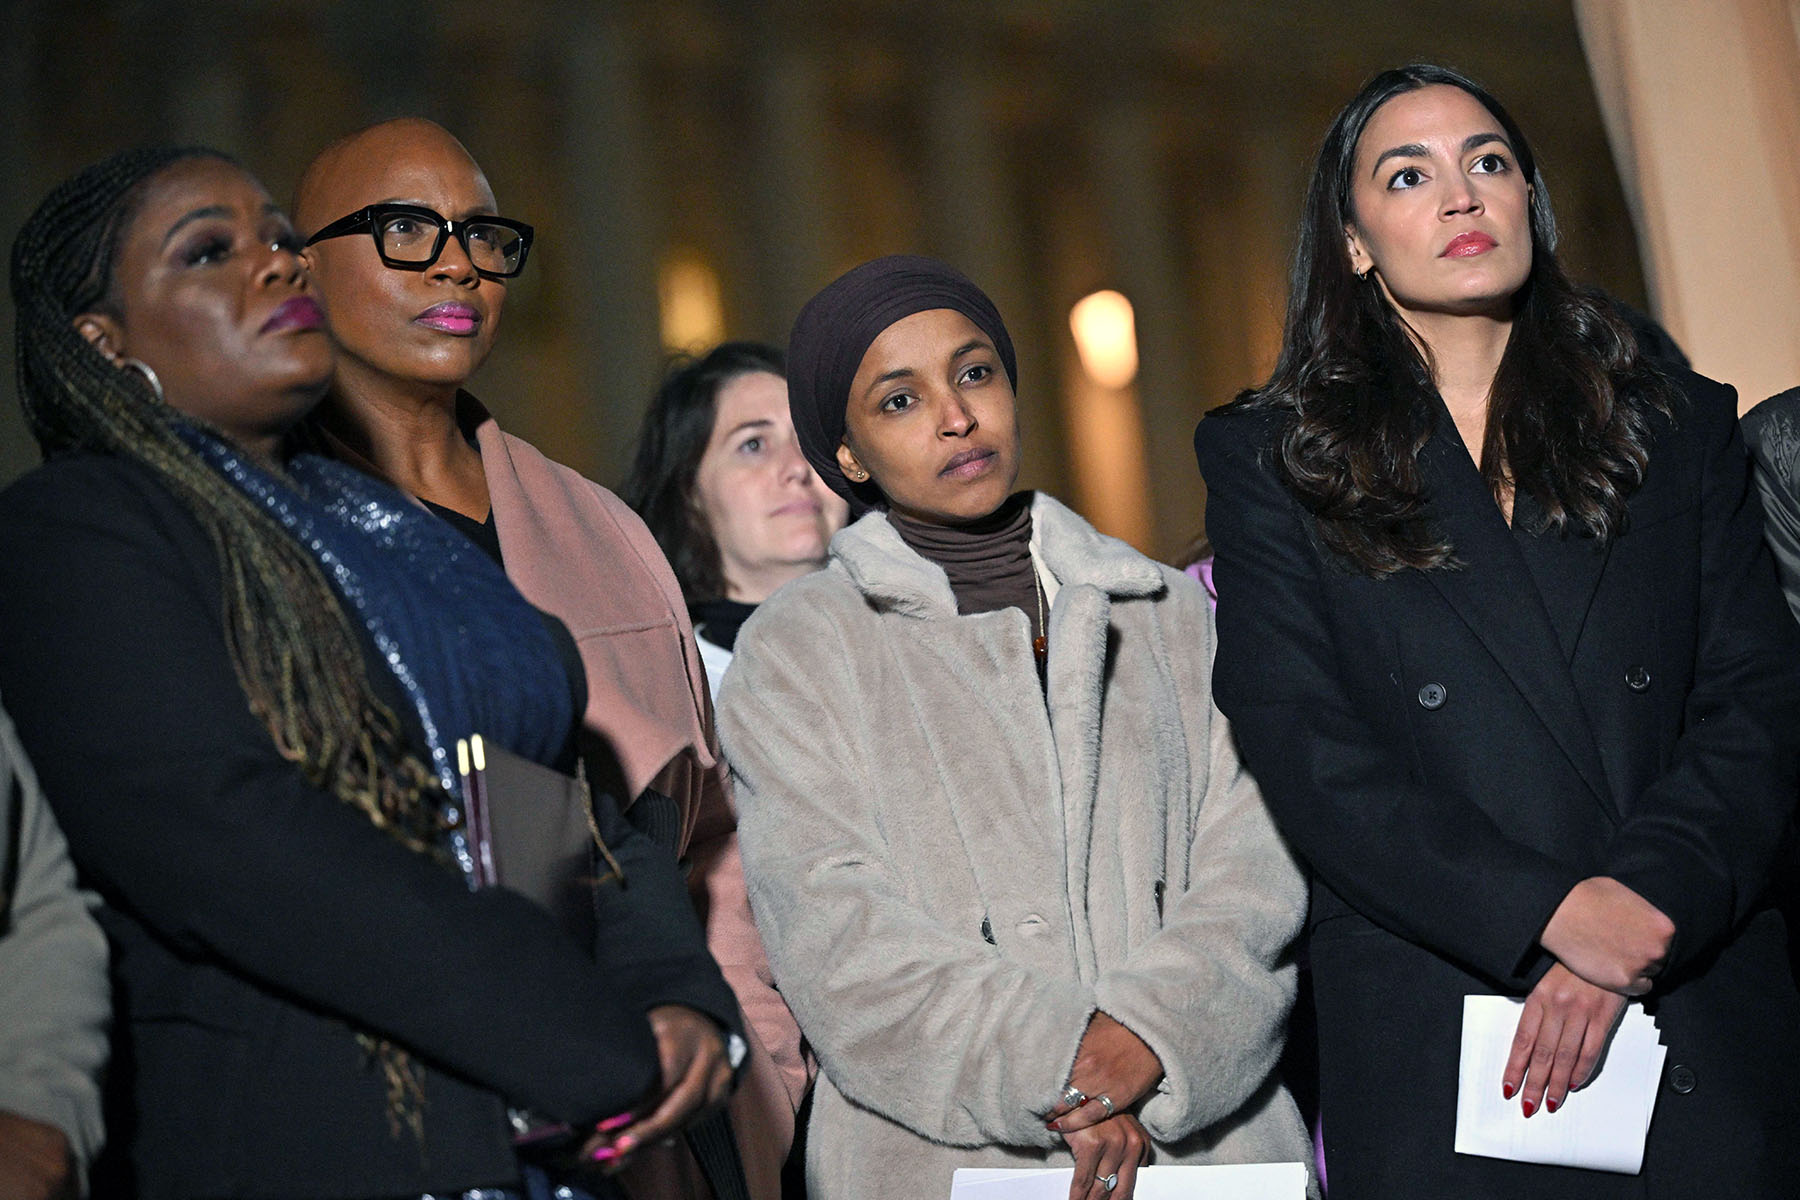 From left, Rep. Cori Bush, Rep. Ayanna Pressley, Rep. Ilhan Omar and Rep. Alexandria Ocasio-Cortez attend a news conference calling for a ceasefire between Israel and Hamas.